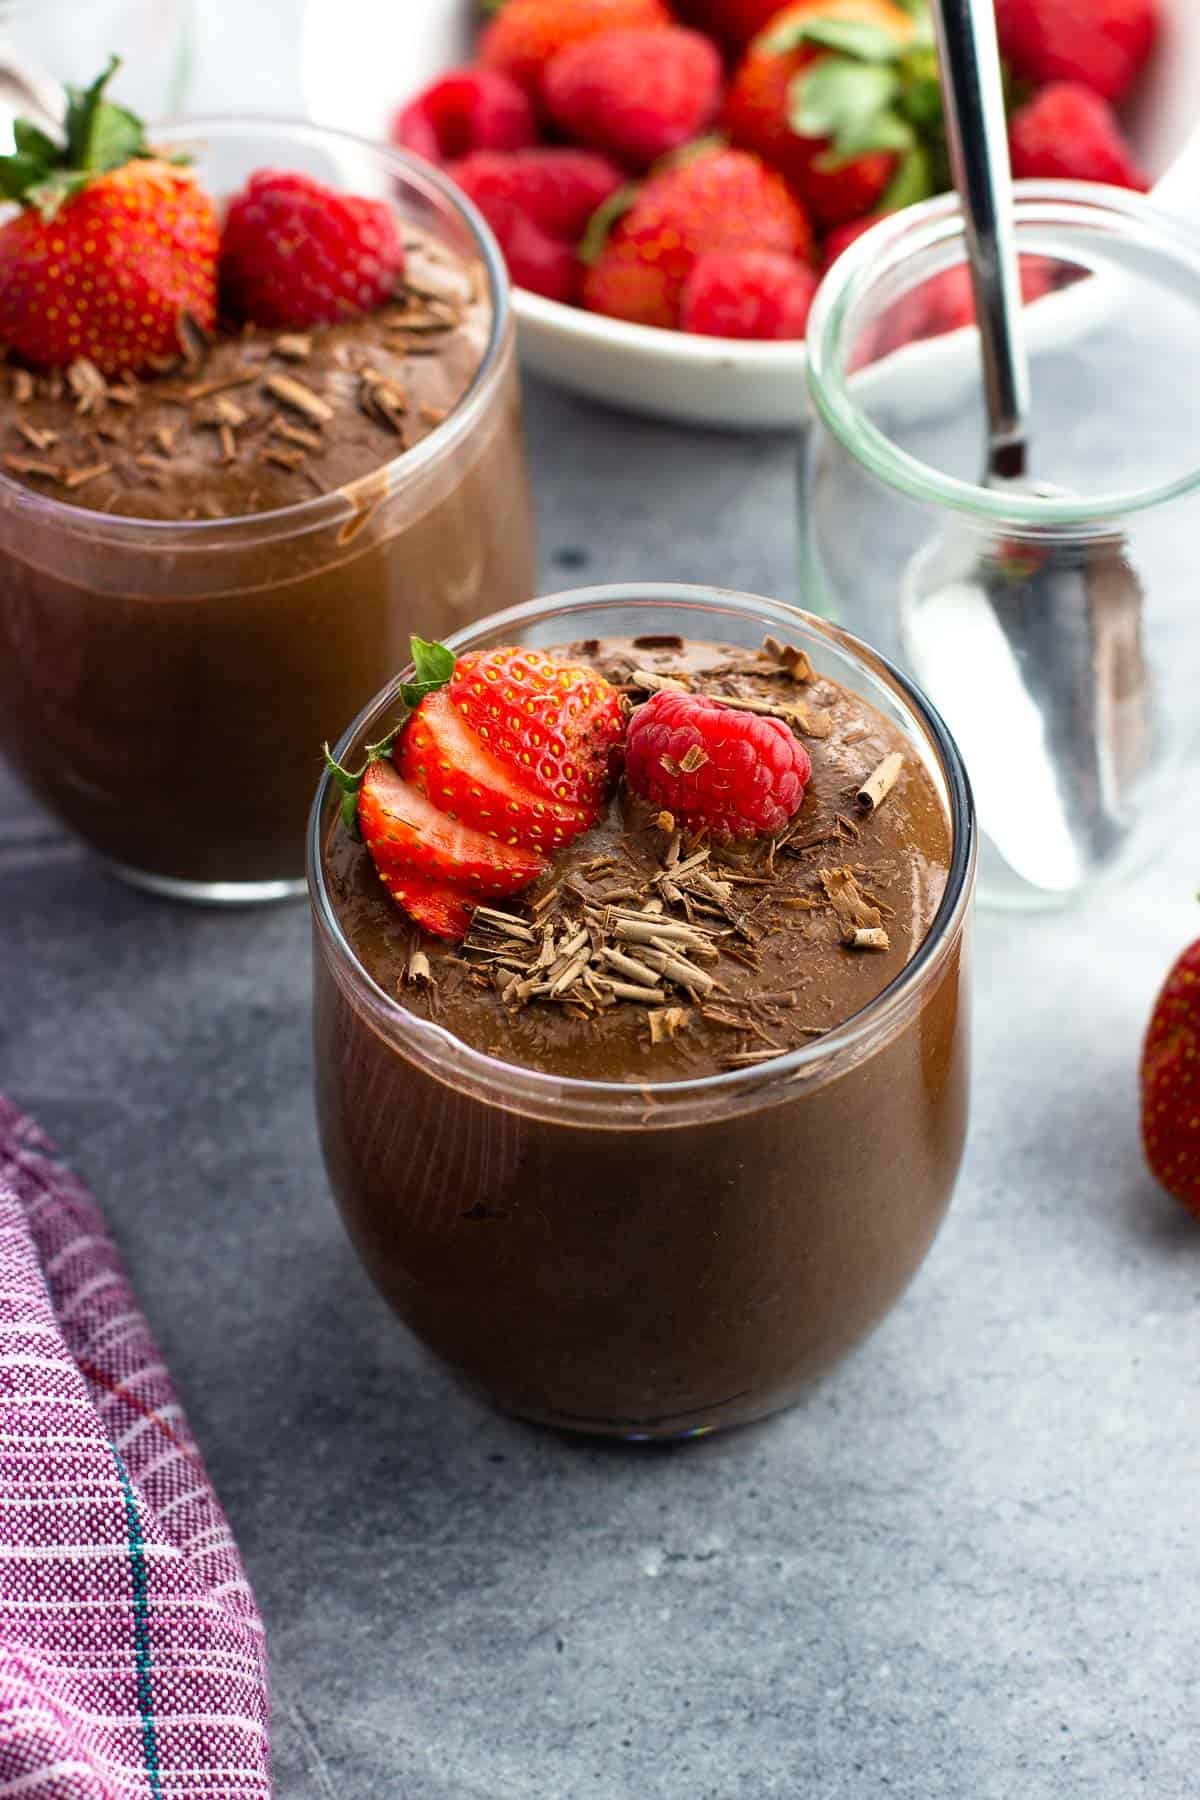 Chocolate chia seed pudding cups topped with strawberries and raspberries.